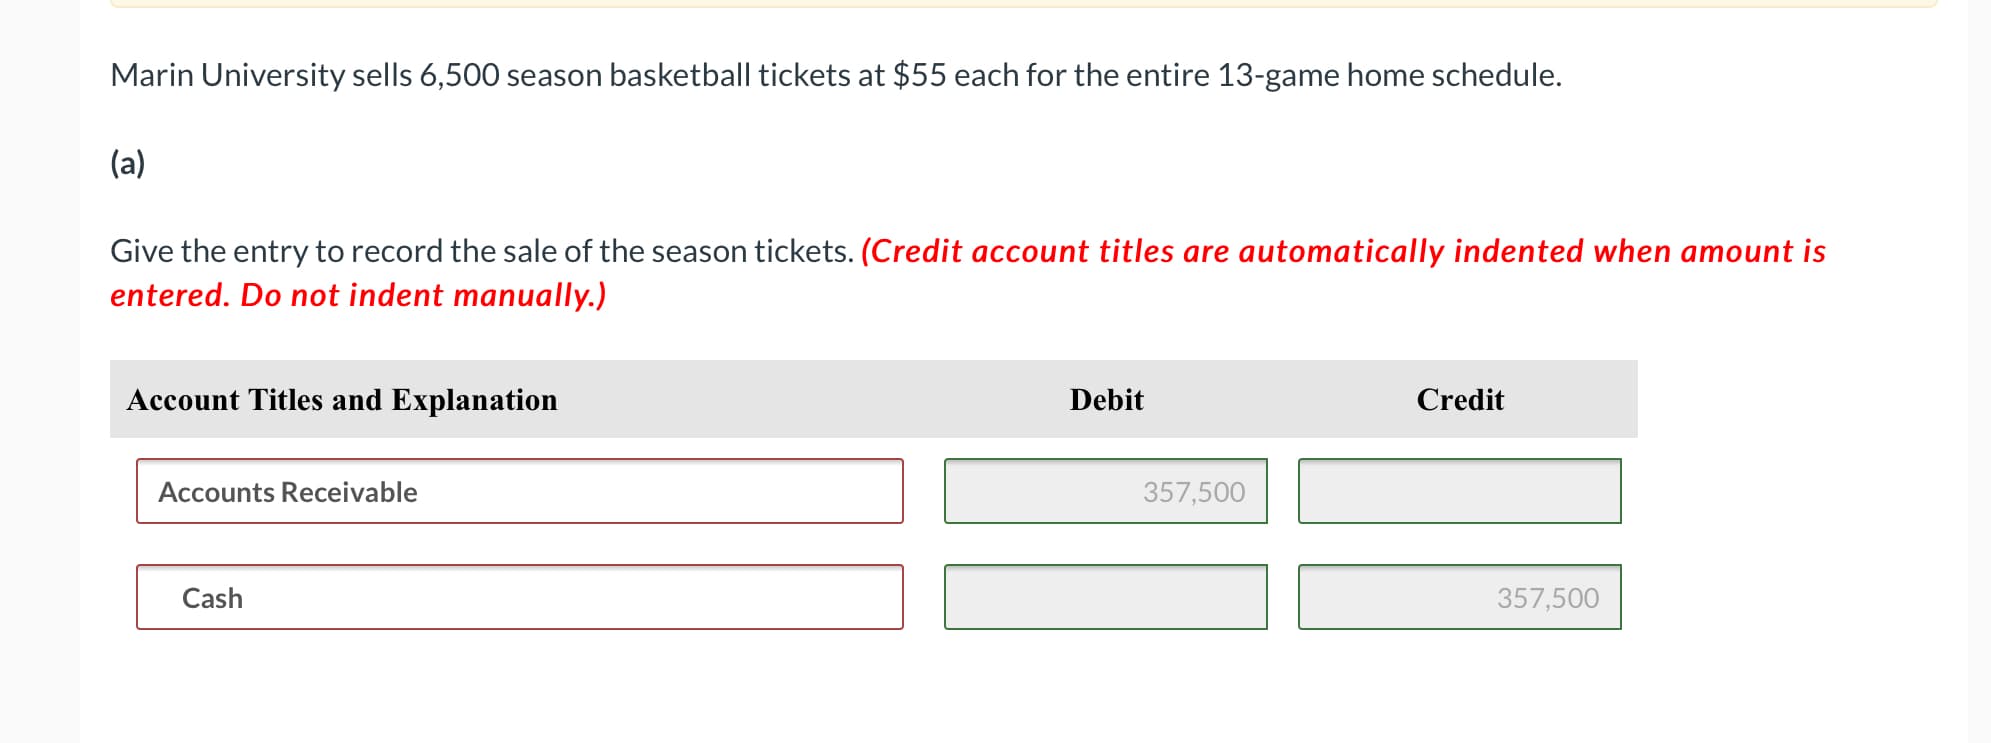 Marin University sells 6,500 season basketball tickets at $55 each for the entire 13-game home schedule.
(a)
Give the entry to record the sale of the season tickets. (Credit account titles are automatically indented when amount is
entered. Do not indent manually.)
Account Titles and Explanation
Debit
Credit
Accounts Receivable
357,500
Cash
357,500
